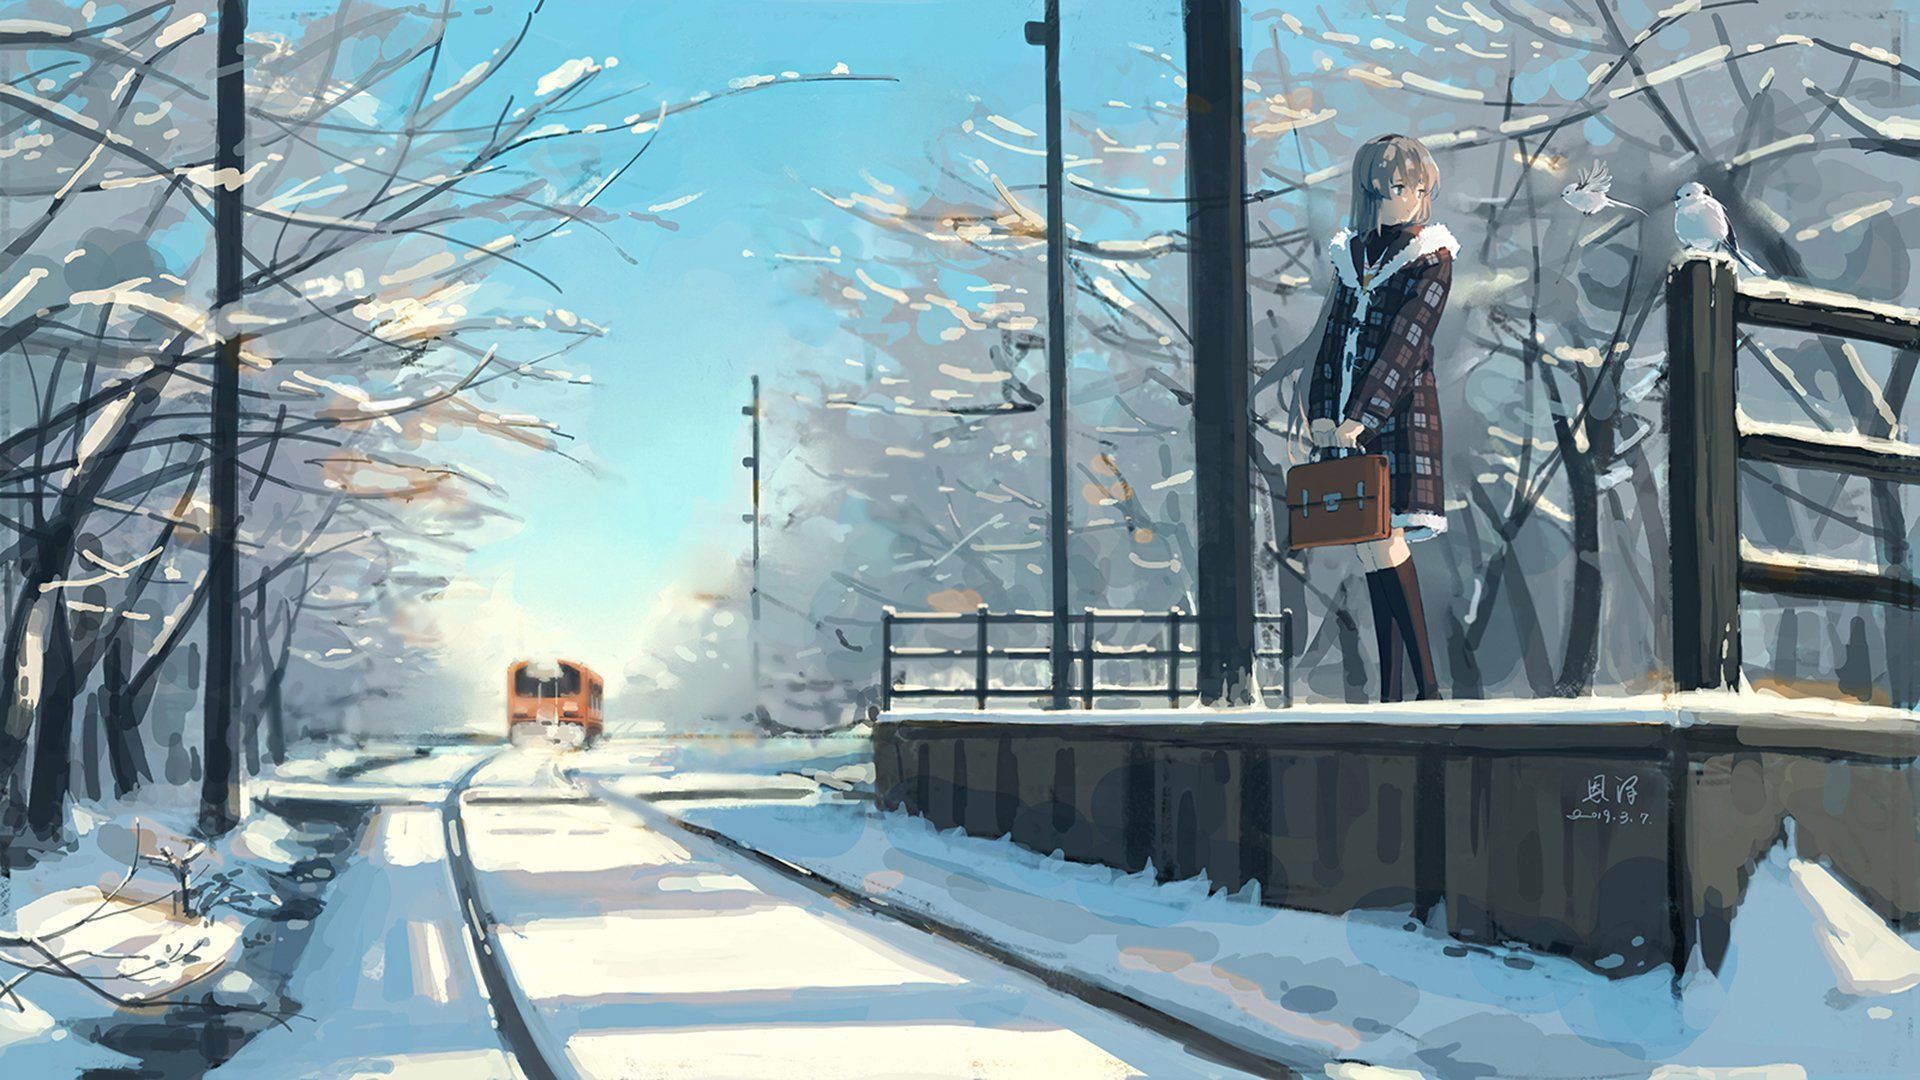 Wallpaper ID 98453  anime night mountains building snow winter free  download